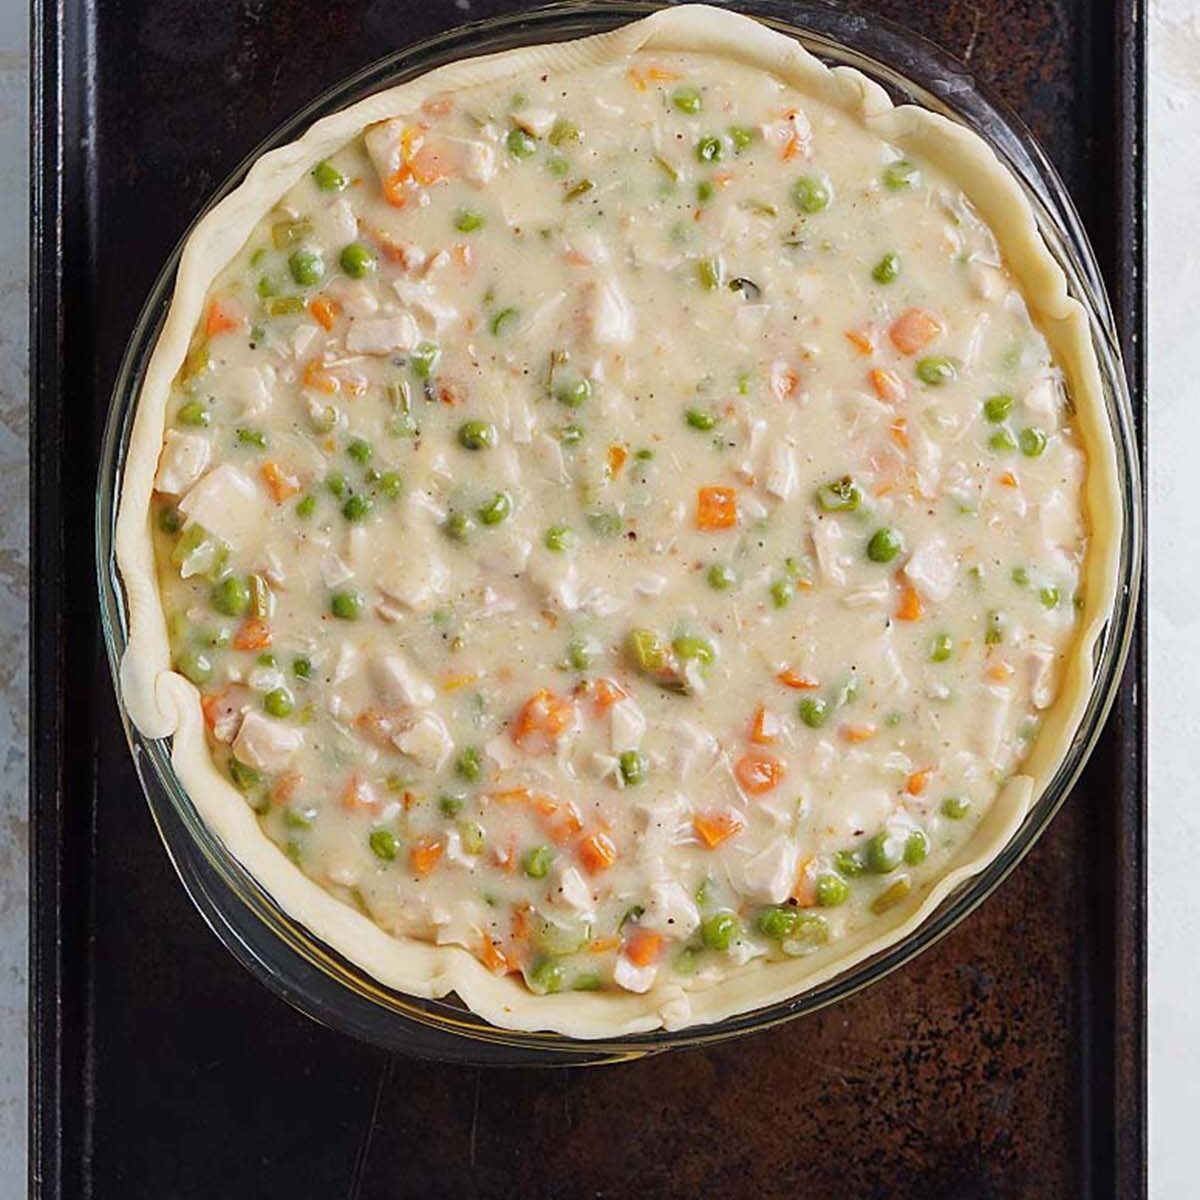 A pot pie container with the pie crust and filling inside.